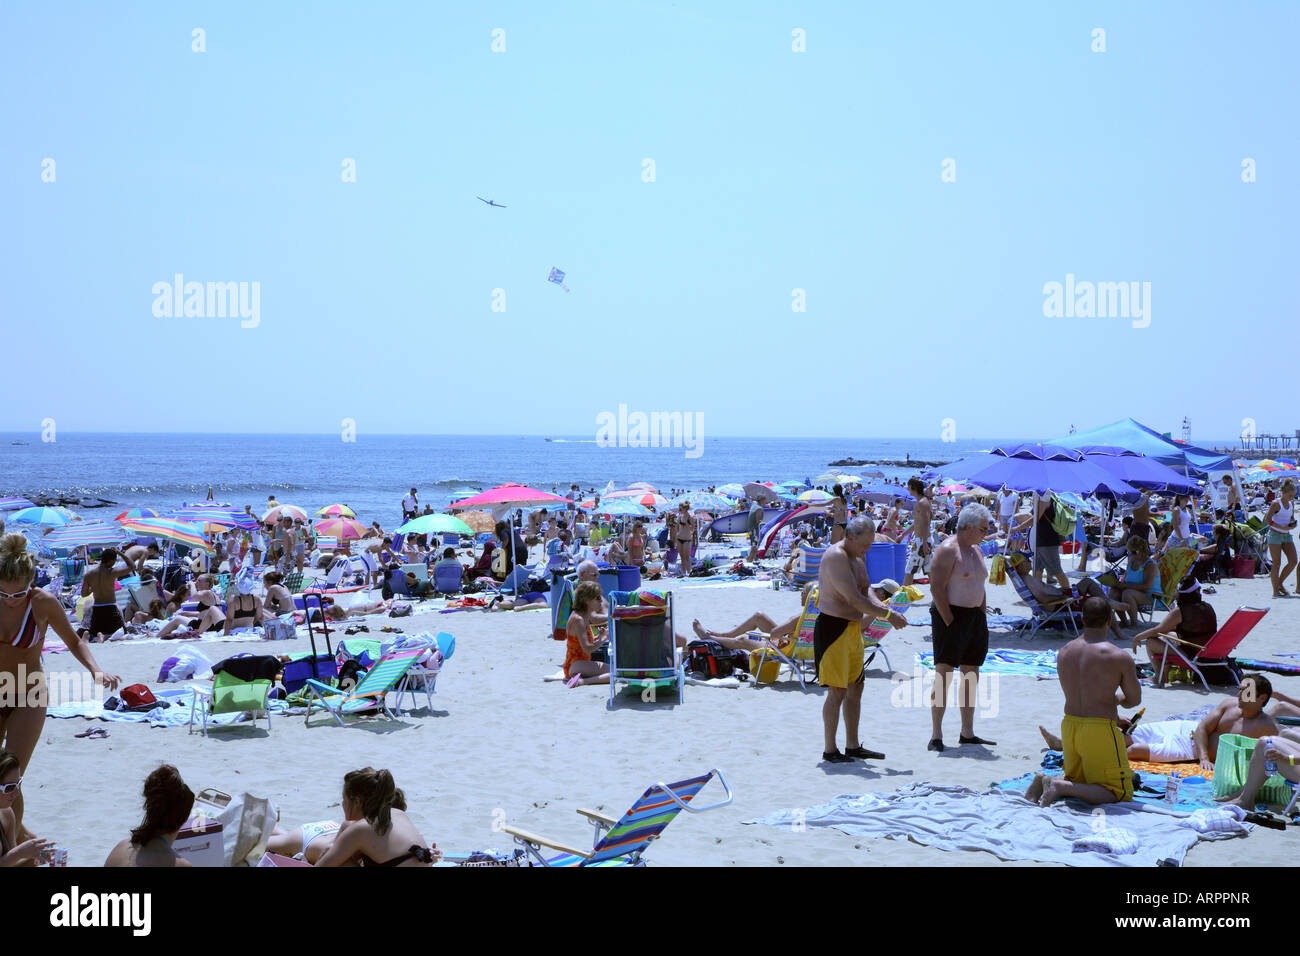 Crowd of people with colorful beach umbrellas, chairs and towels on sandy beach at New Jersey shore. Stock Photo